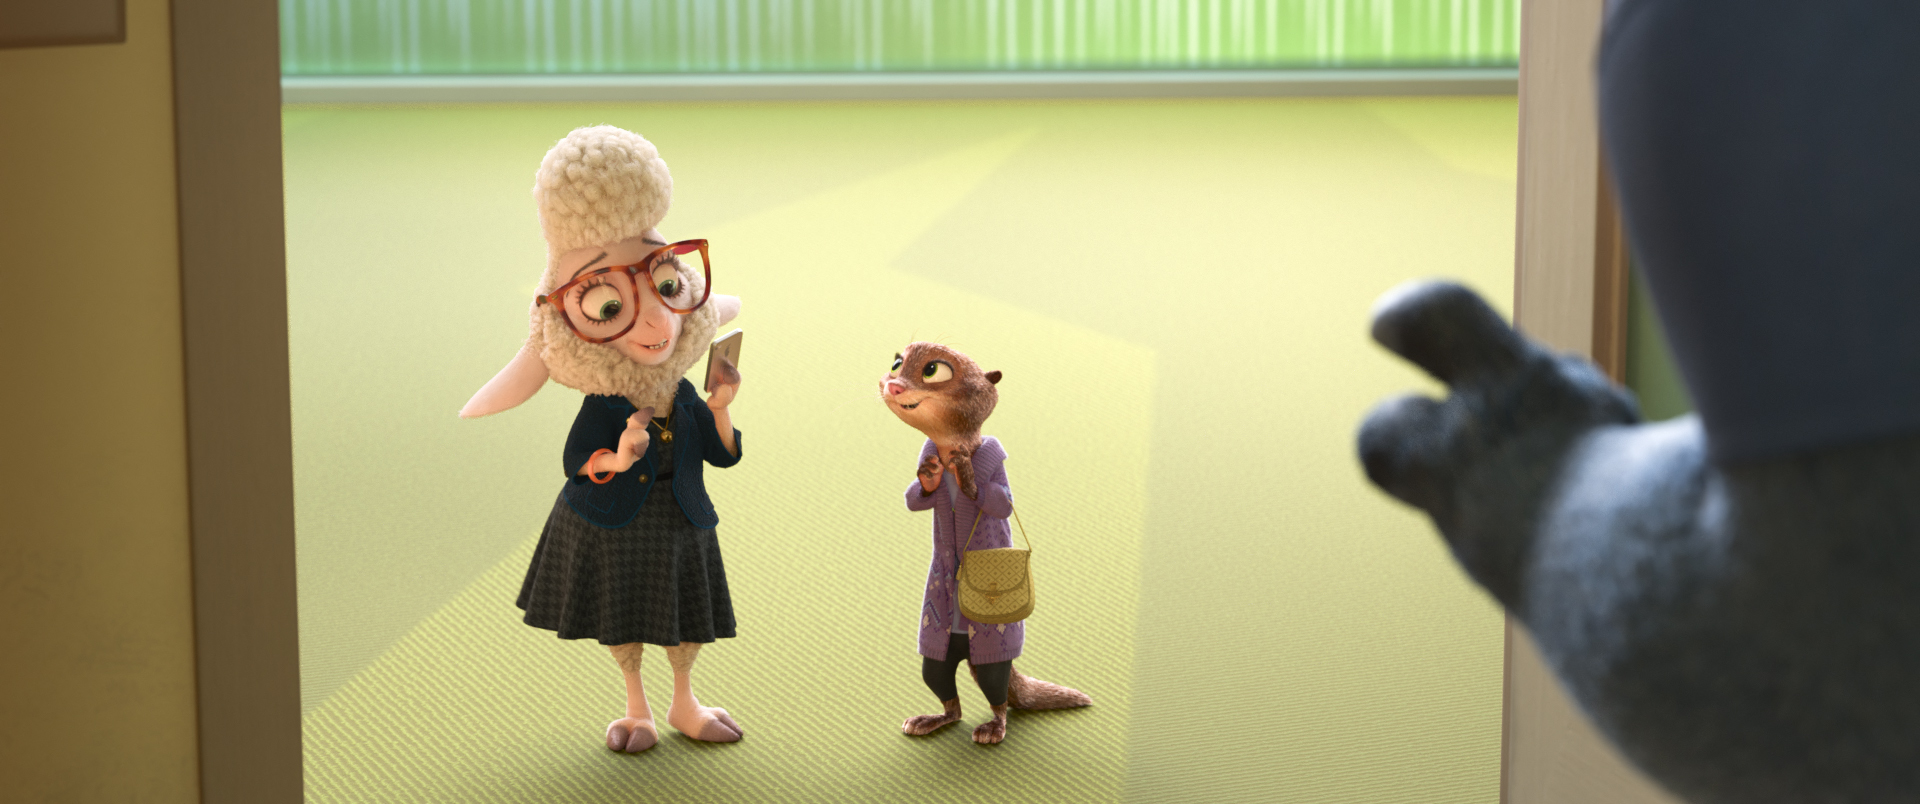 ZOOTRÓPOLIS. Assistant Mayor Bellwether & Mrs. Otterton. ©2016 Disney. All Rights Reserved.